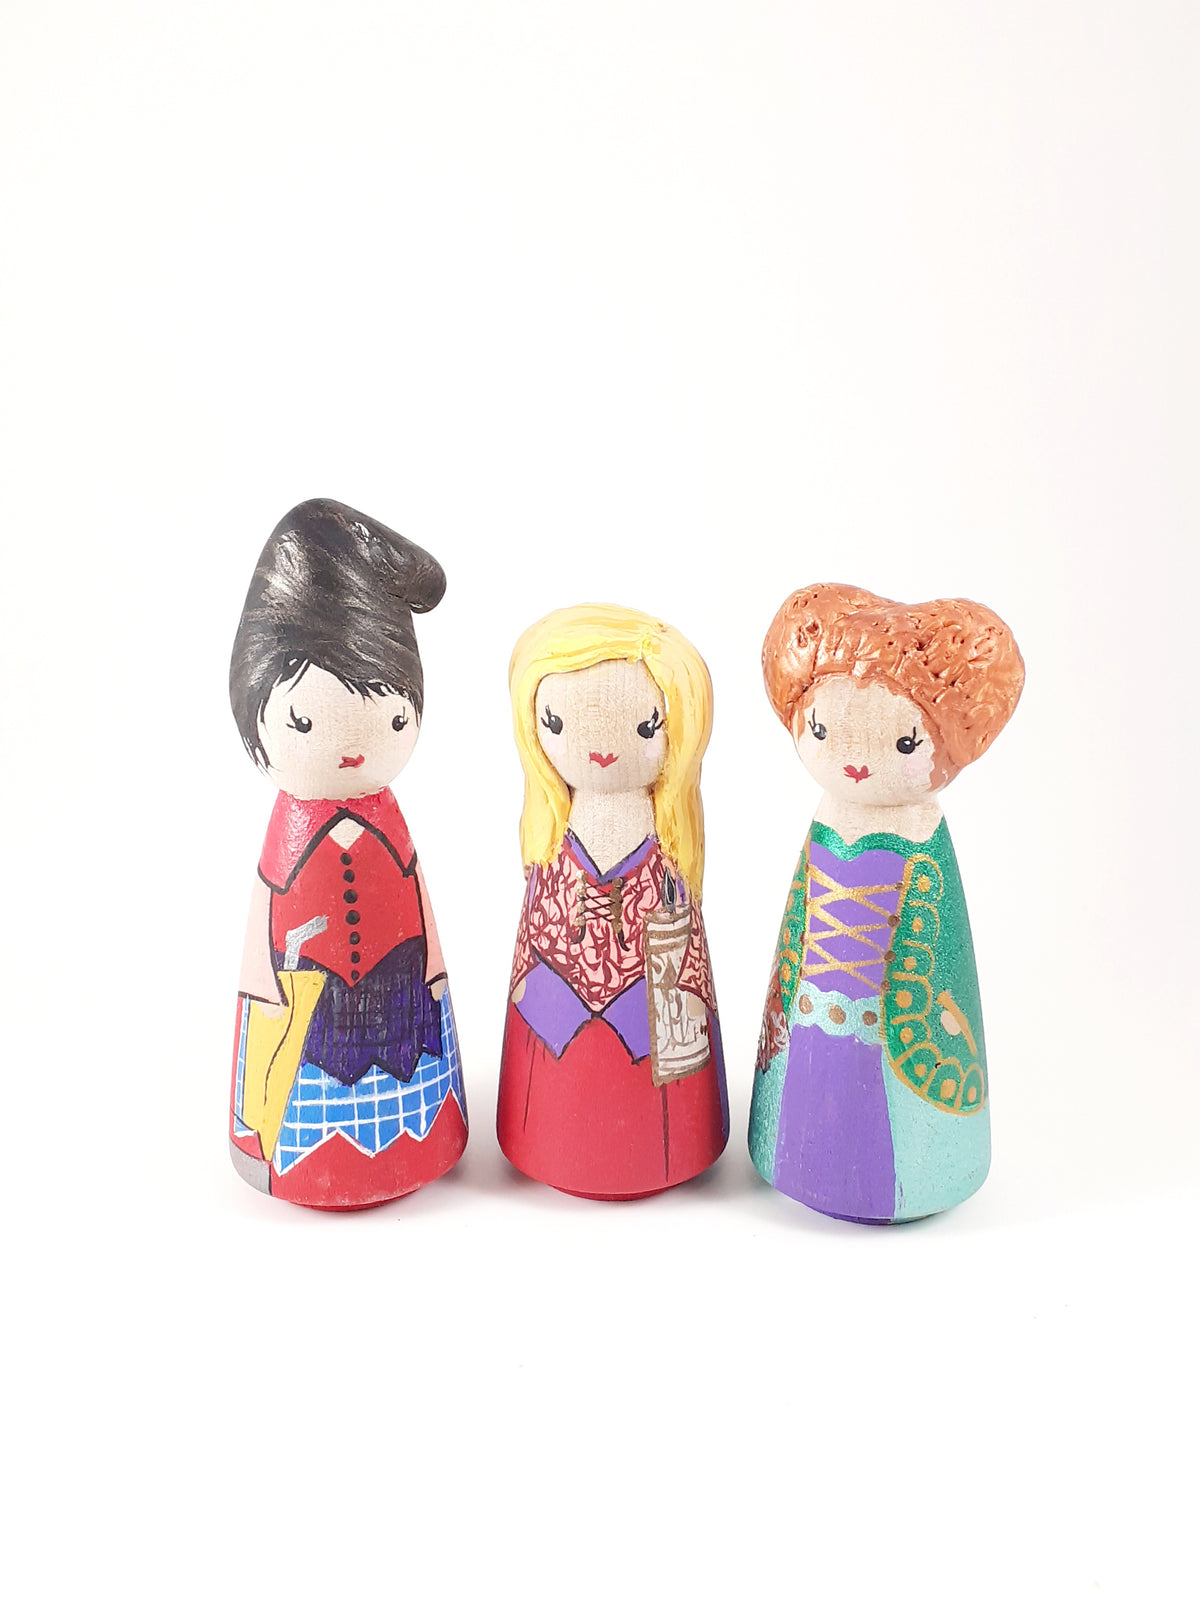 Custom peg doll with clay elements